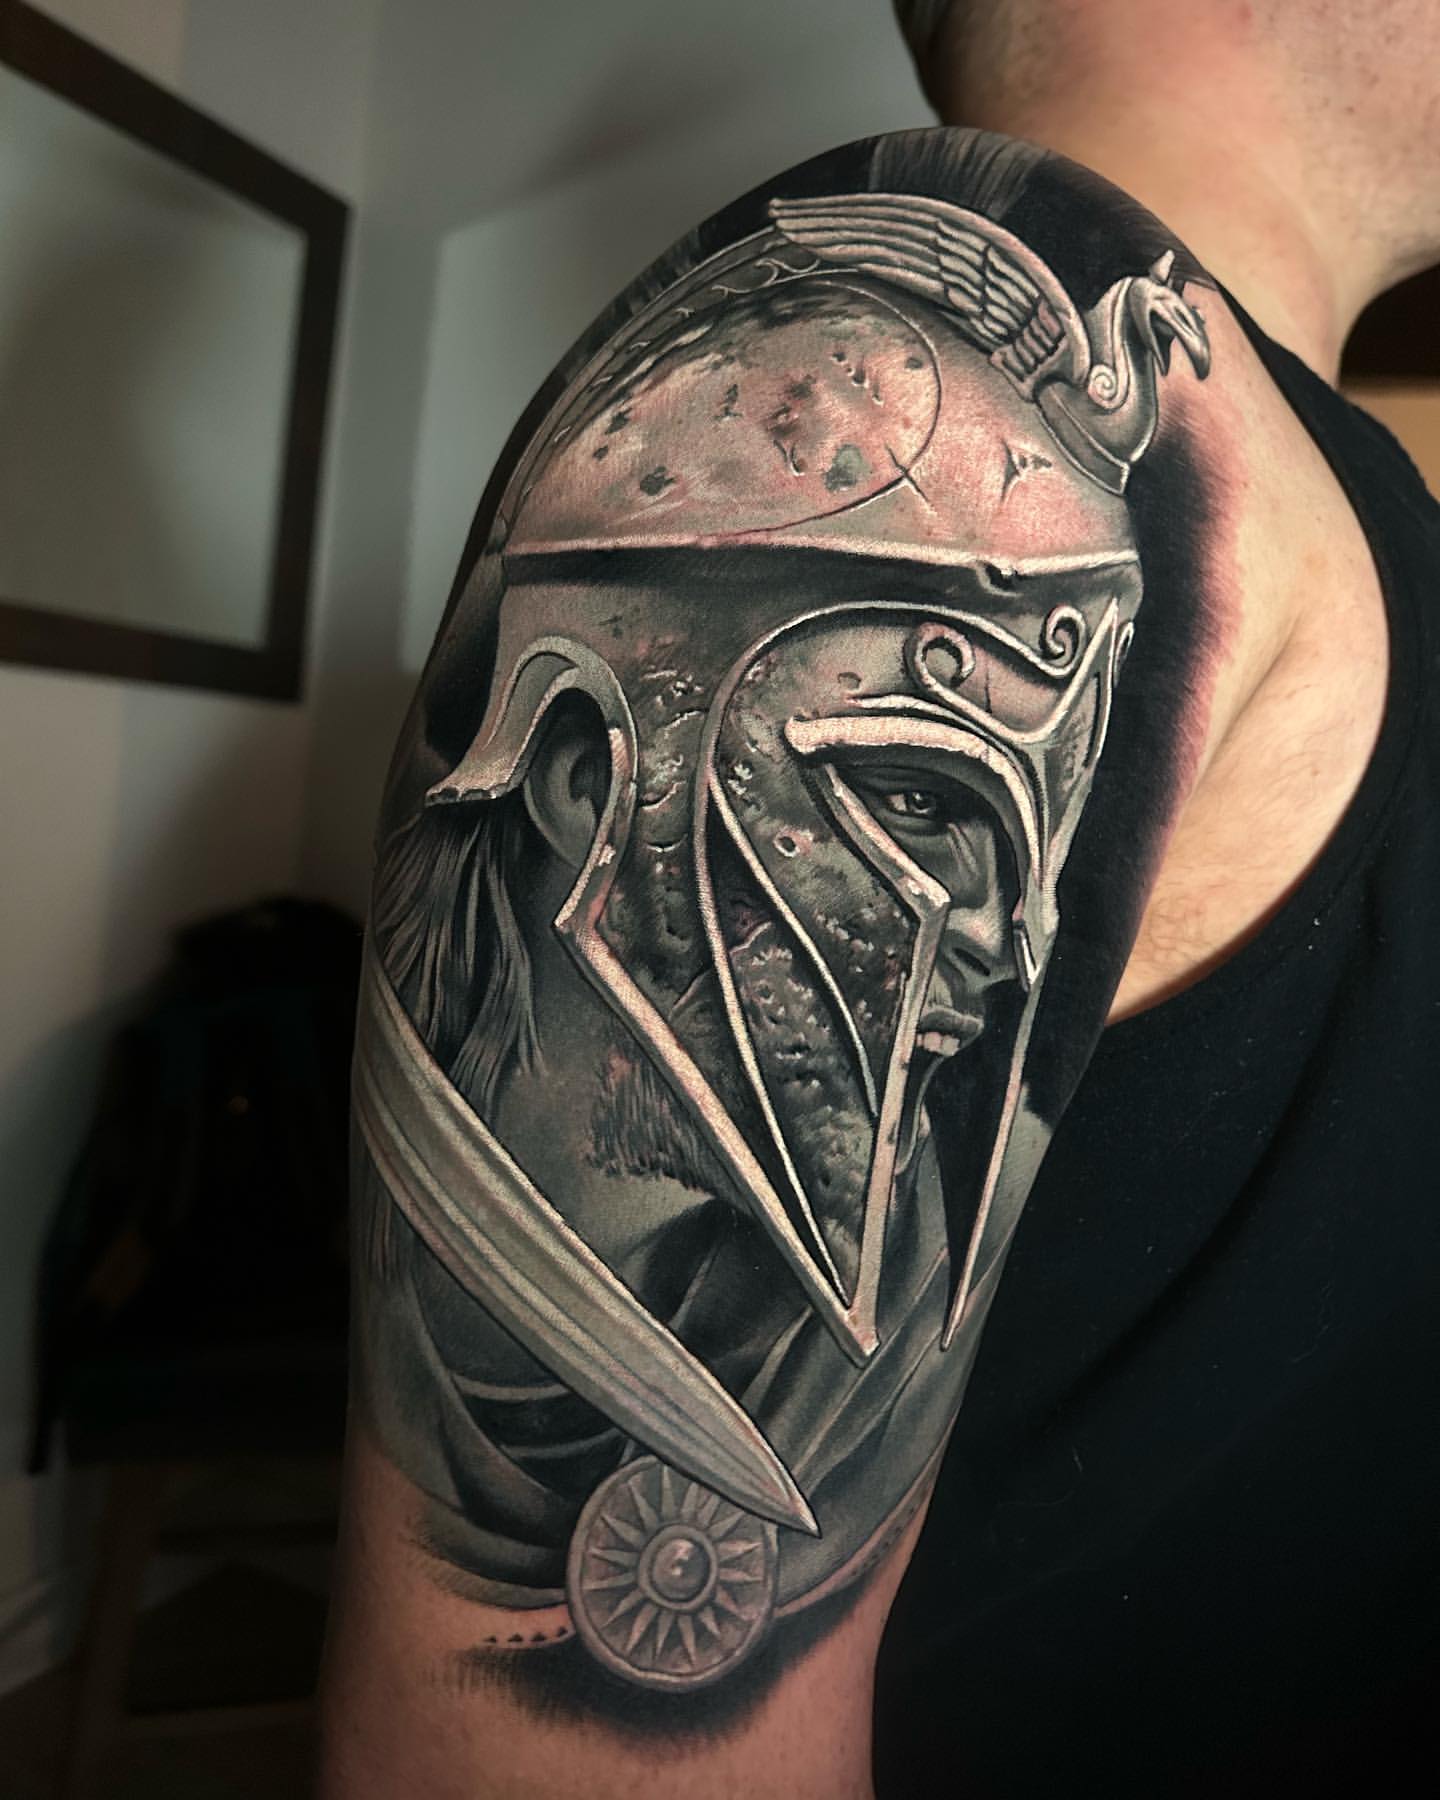 Tattoo uploaded by Sunny Bhanushali • Leonidas Tattoo (300 Movie) by Sunny  Bhanushali at Aliens Tattoo, Mumbai. Client is a big fan of Frank Miller's  comic, “300”. He loves all the characters